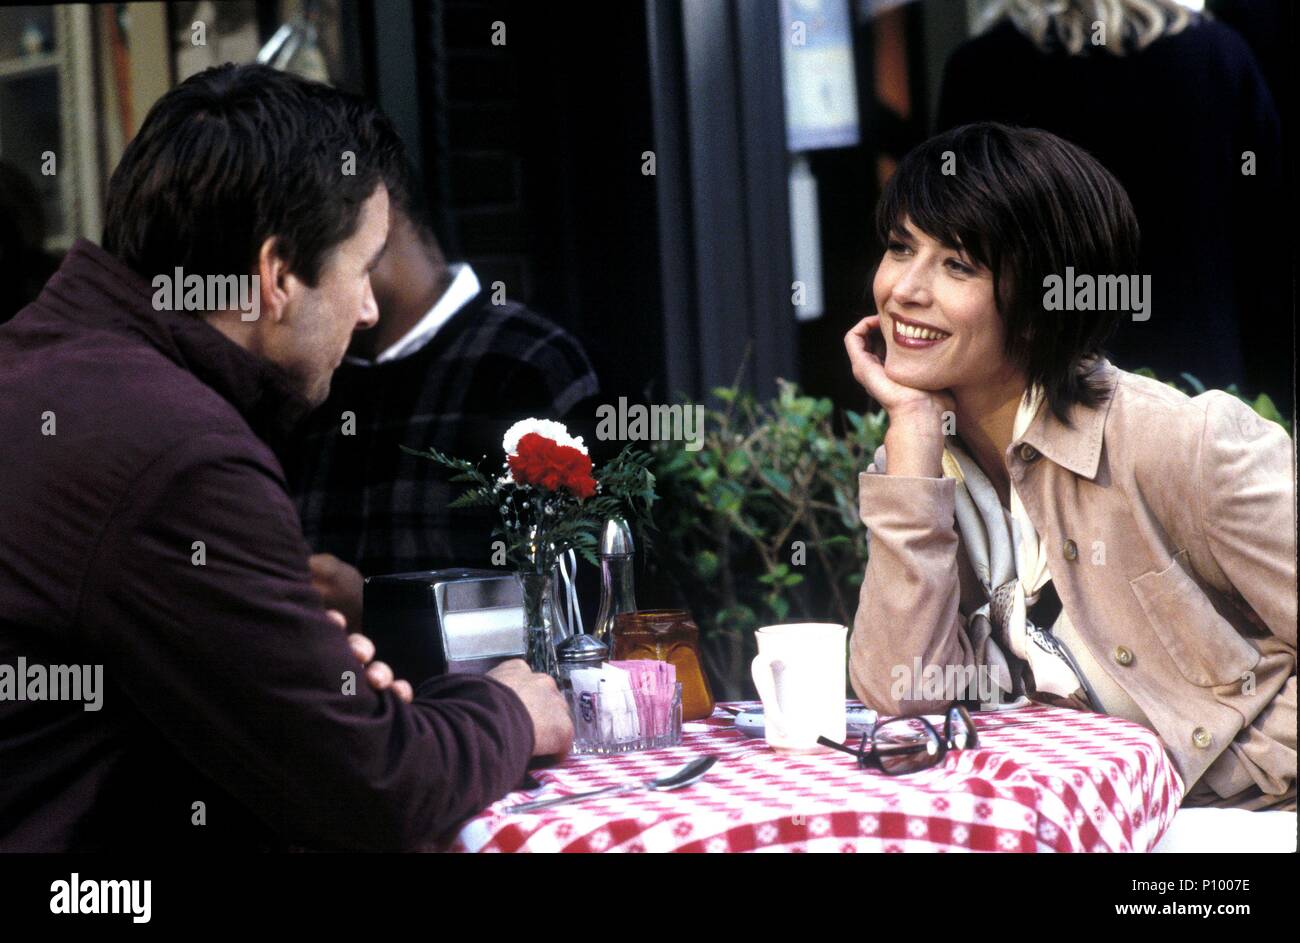 Original Film Title: ALEX AND EMMA.  English Title: ALEX AND EMMA.  Film Director: ROB REINER.  Year: 2003.  Stars: SOPHIE MARCEAU; LUKE WILSON. Credit: Alex and Emma Productions, Inc / TENNER, SUZANNE / Album Stock Photo